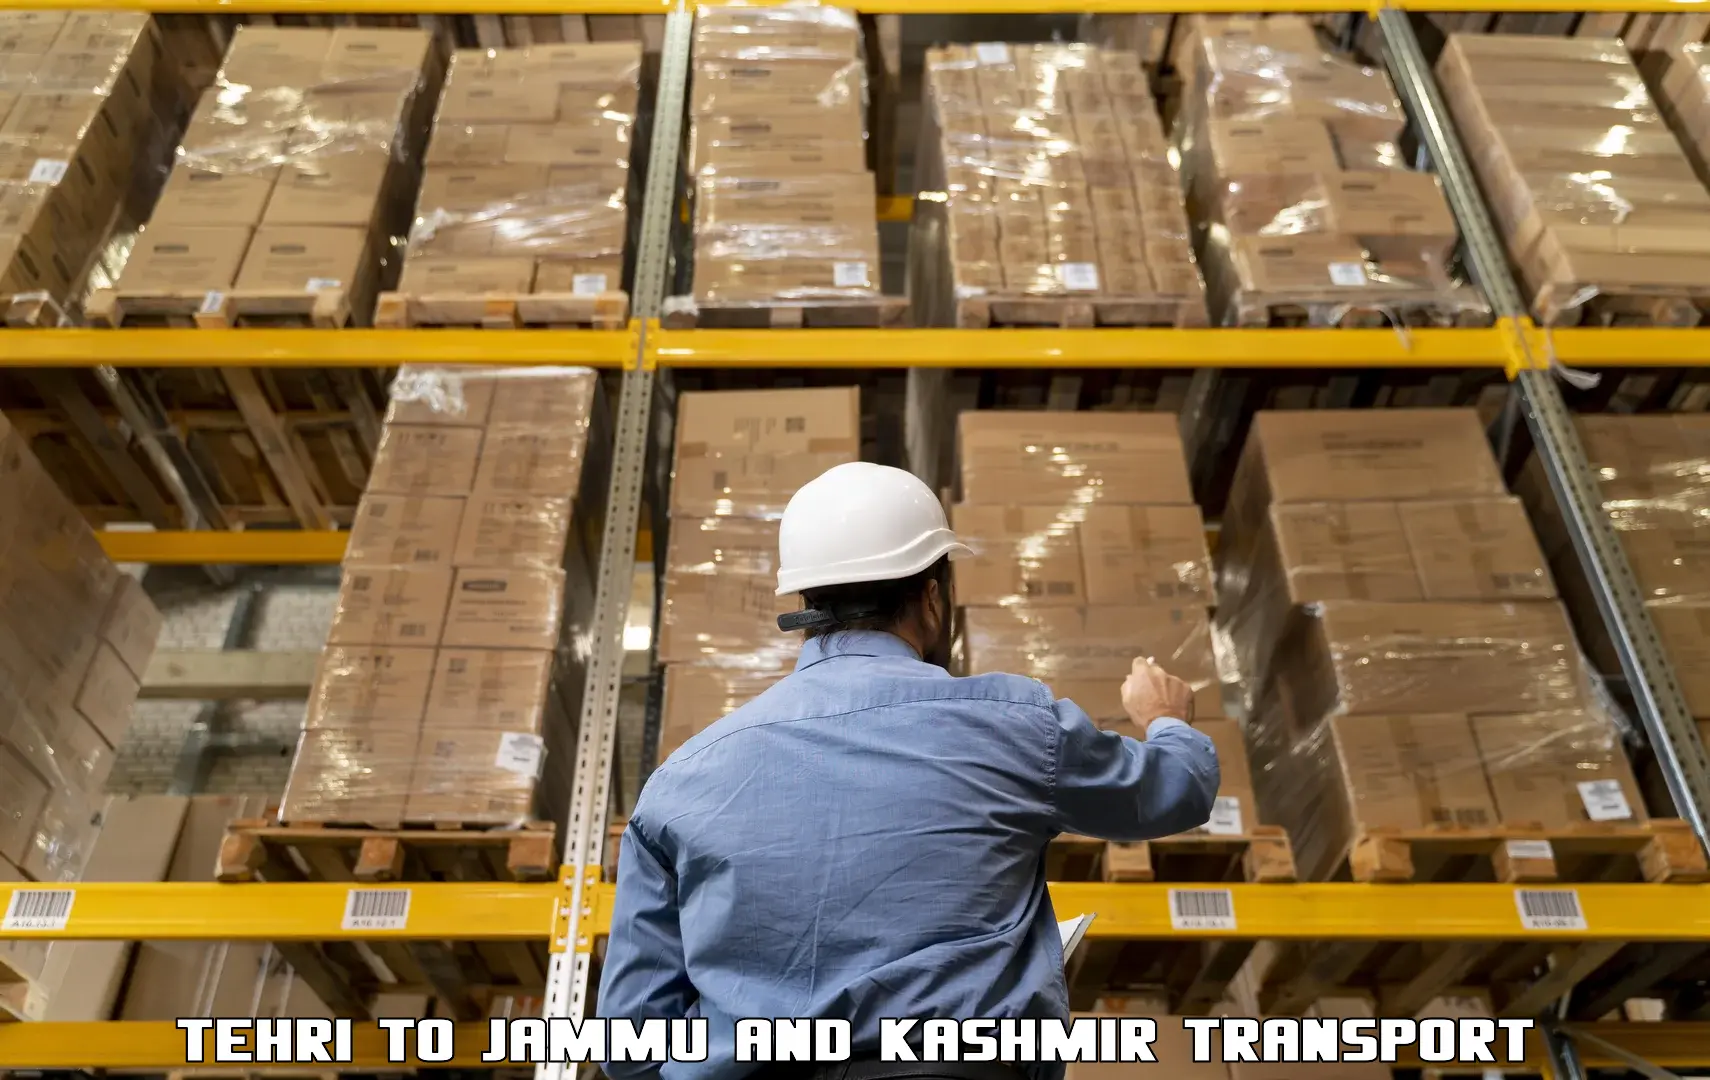 Vehicle transport services Tehri to Reasi